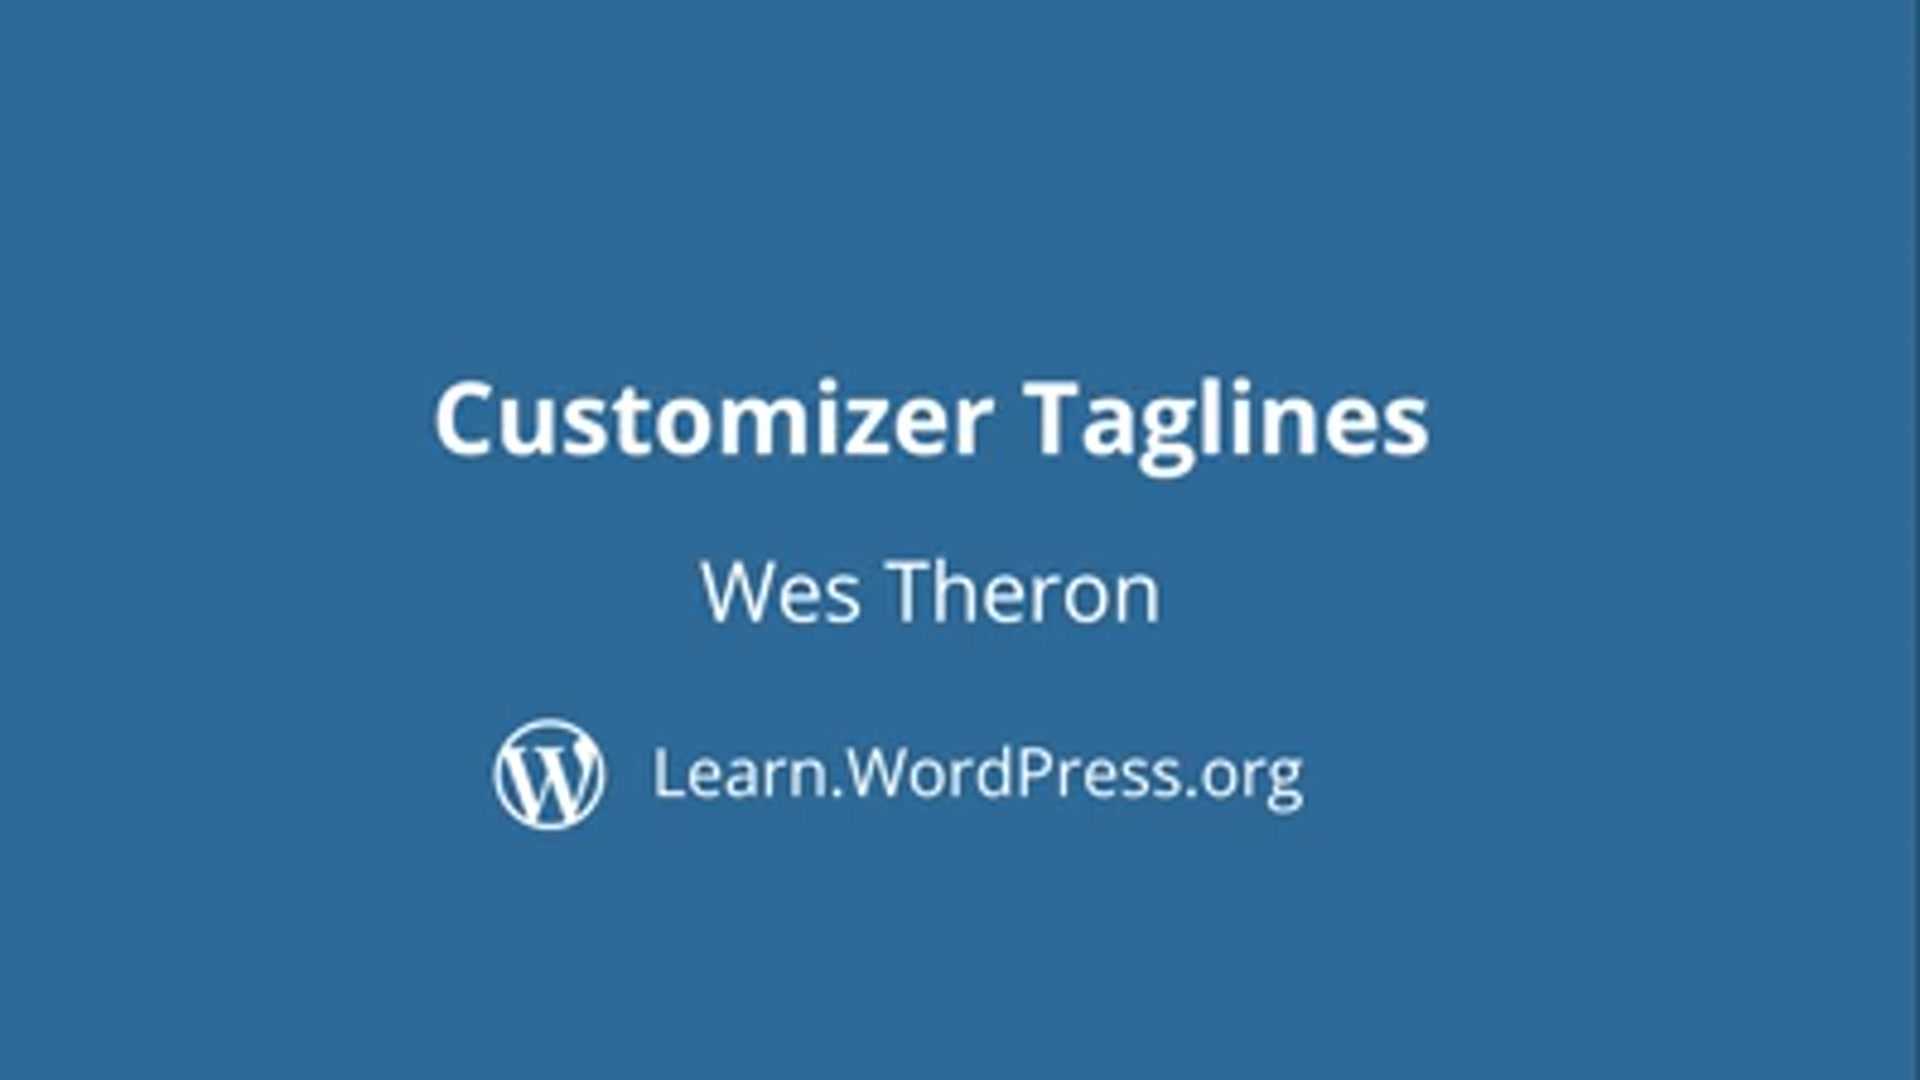 Wes Theron: Customizer Taglines